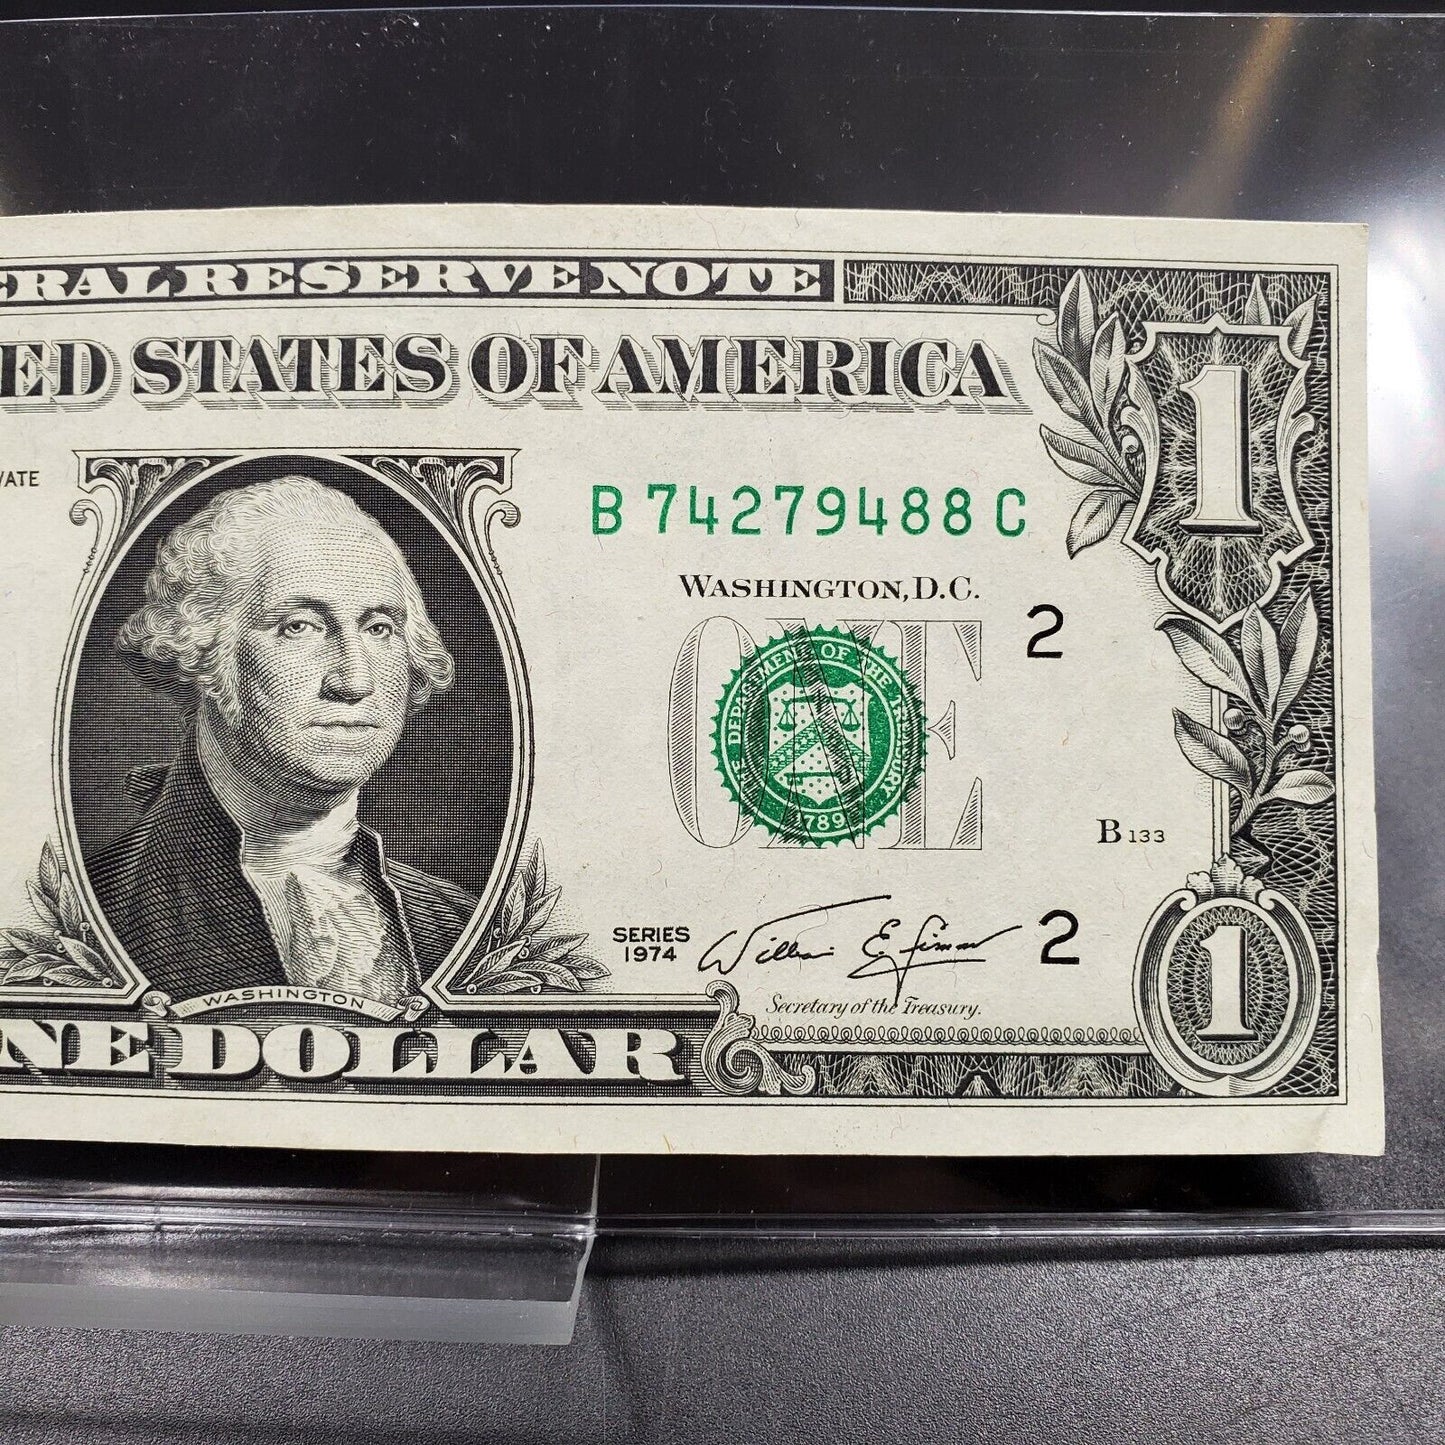 1977 $1 FRN New York Circulated Federal Reserve Note Green Seal Bill